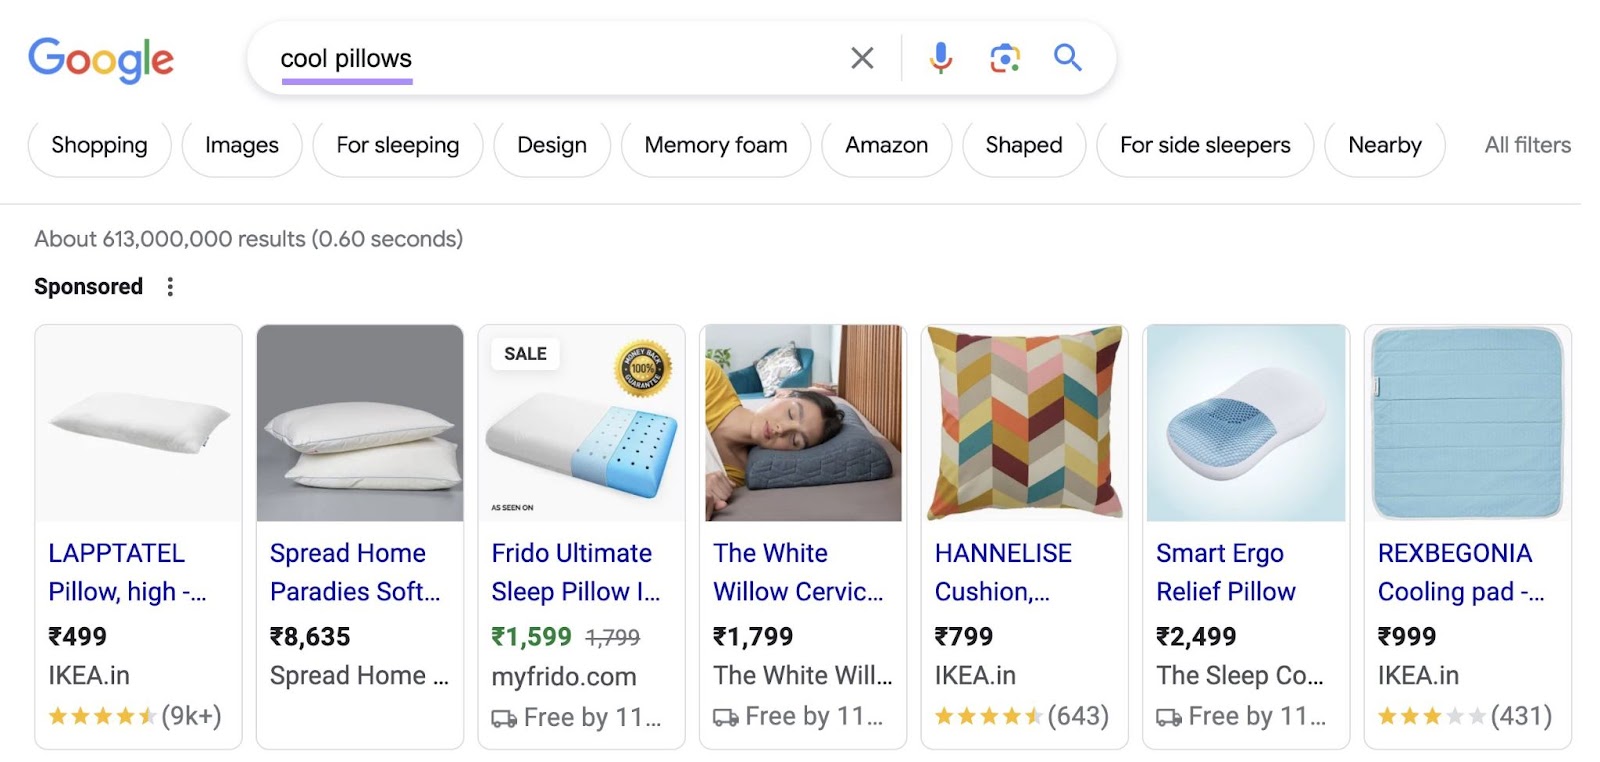 Google s،pping ads for "cool pillows" query